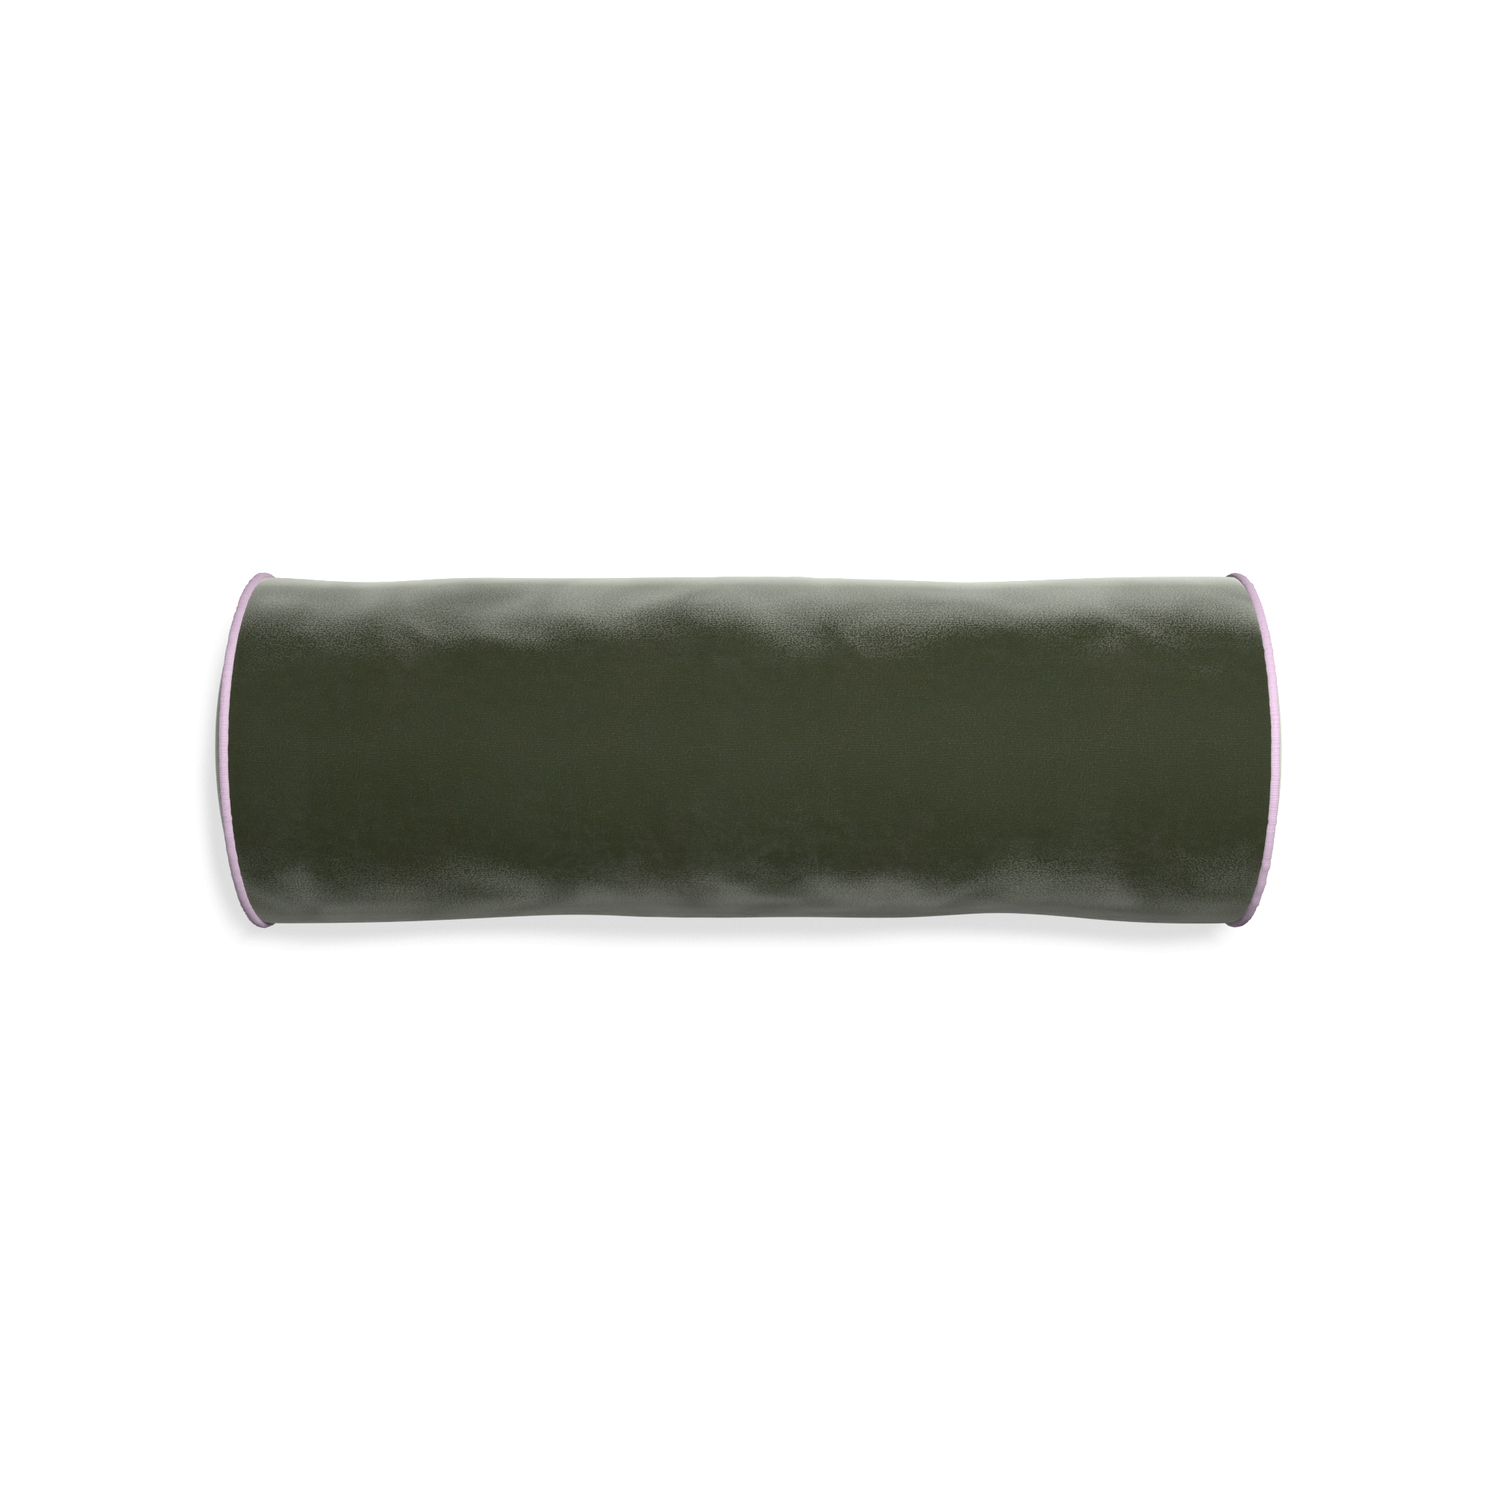 bolster fern green velvet pillow with lilac piping